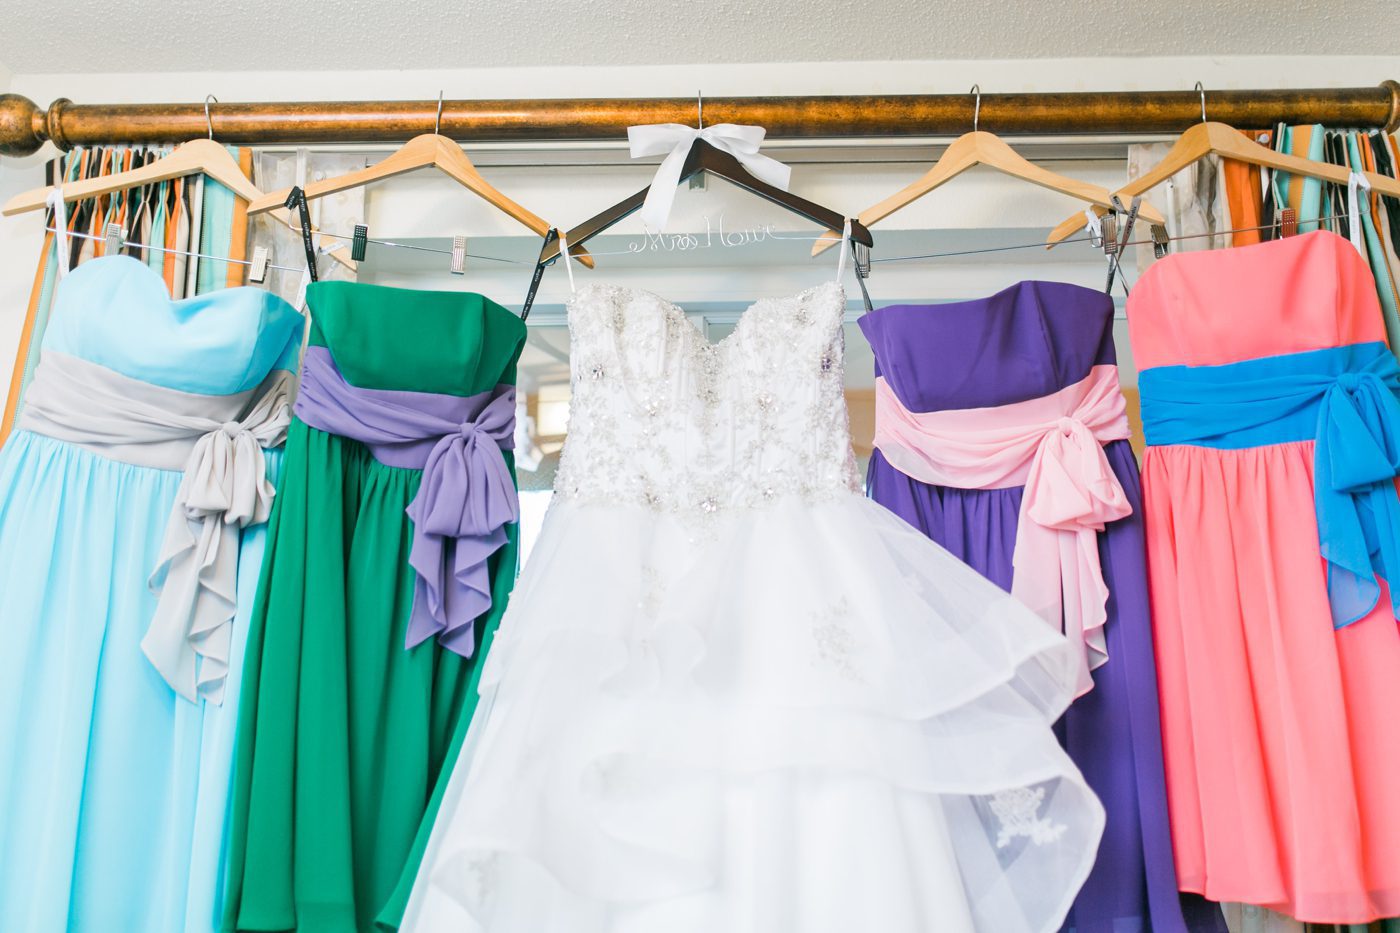 Disney themed bridesmaids dresses hanging in a window